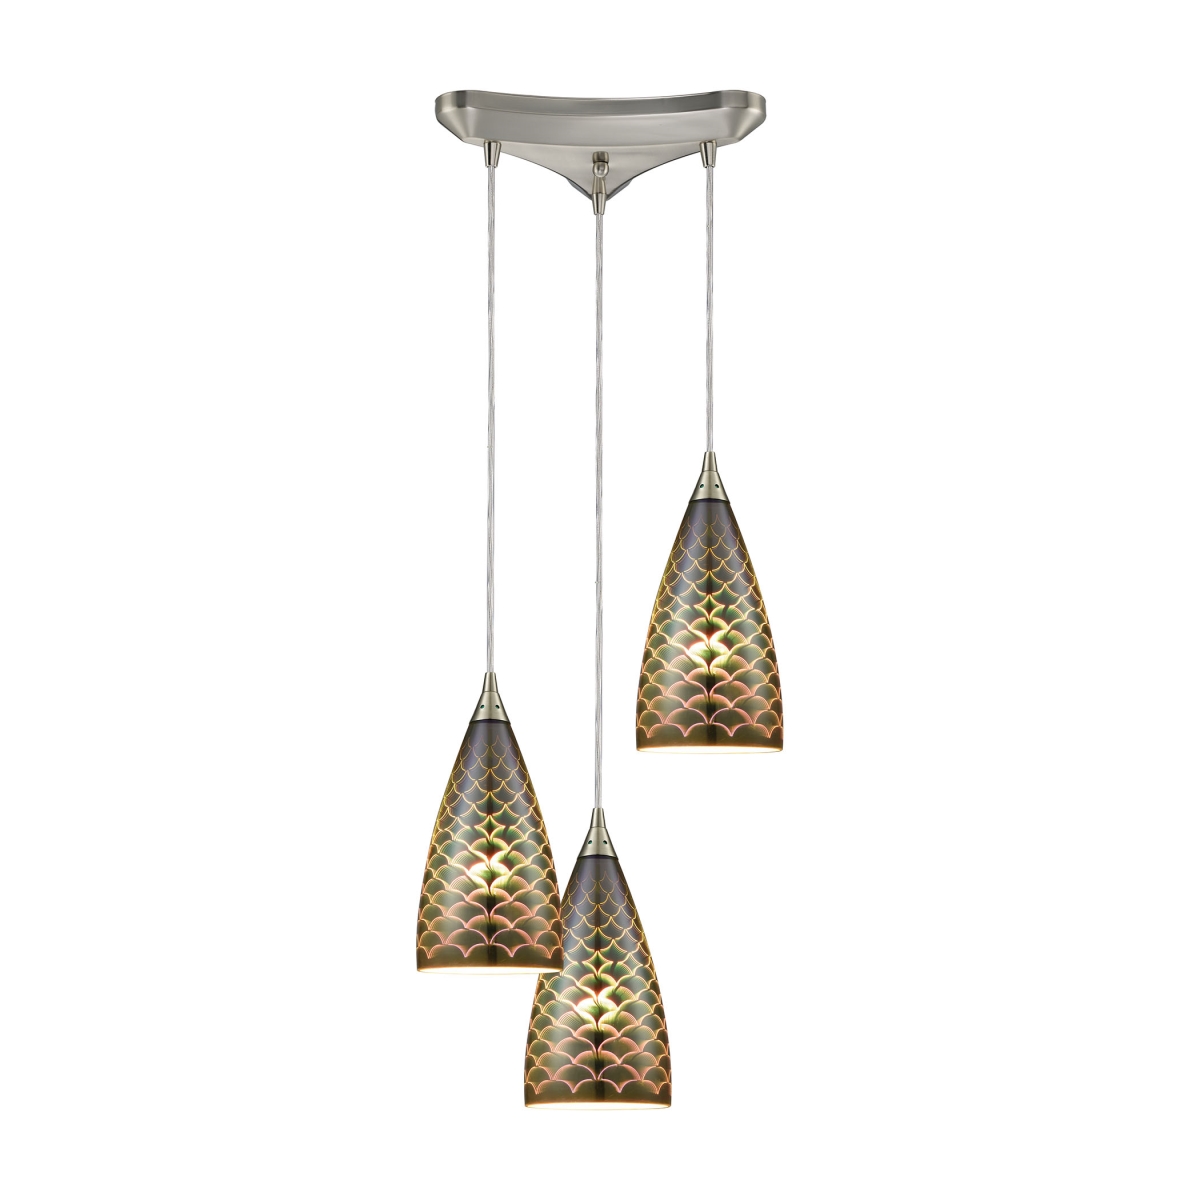 10507-3 Illusions 3-Light Triangle Pan in Satin Nickel with 3-D Fishscale Glass Pendant -  ELK Lighting, 10507/3